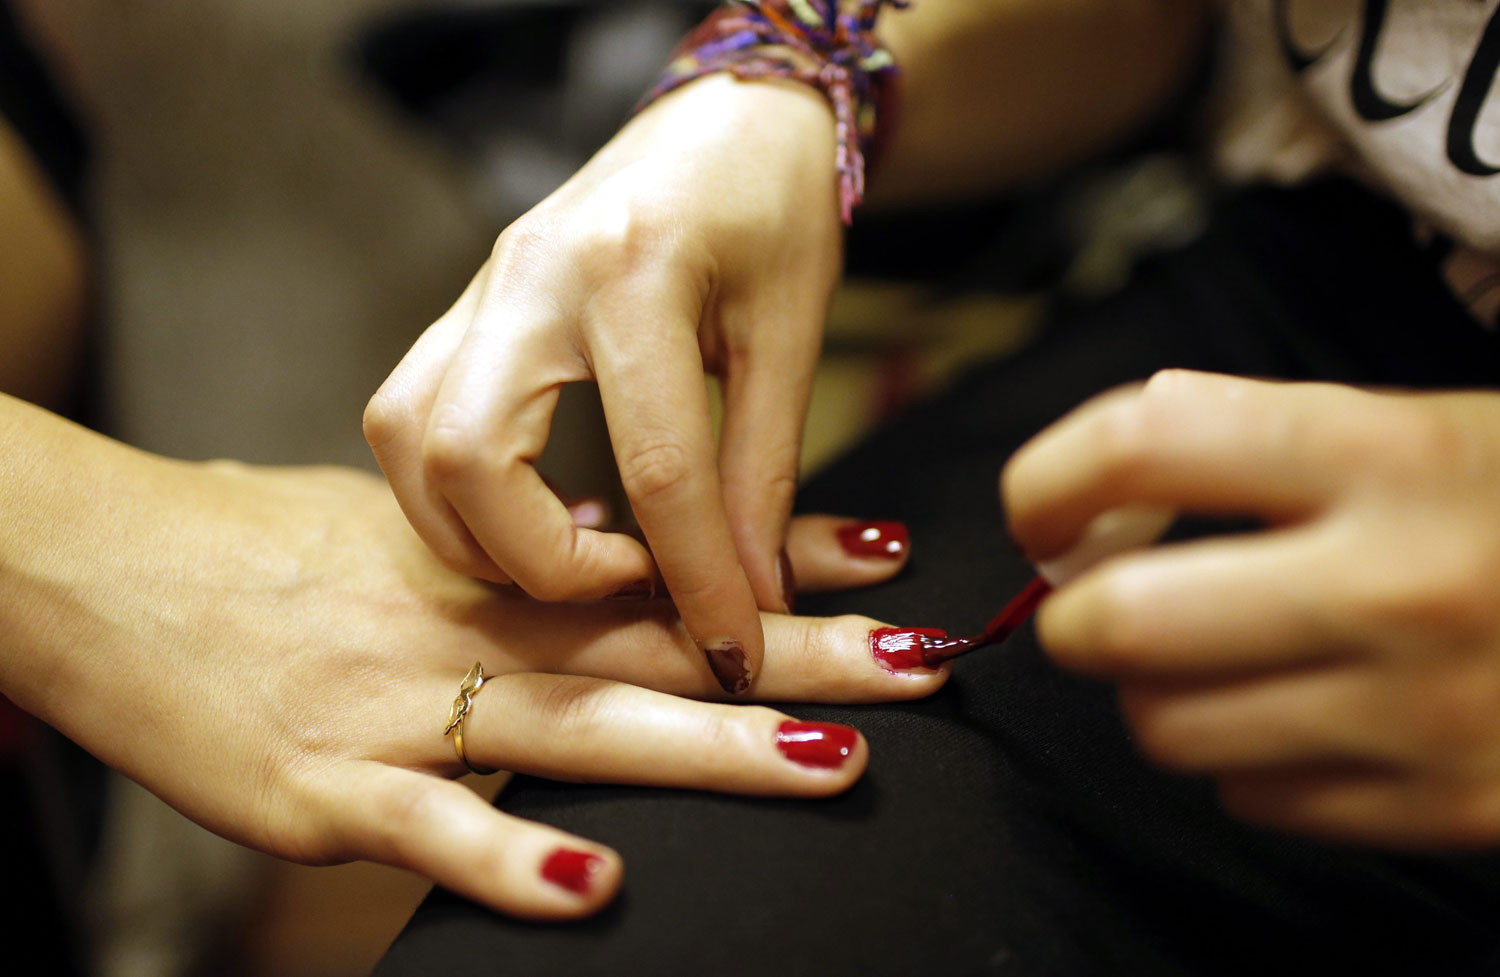 A contestant gets a manicure as other contestants prepare backstage in Istanbul on June 21, 2014.